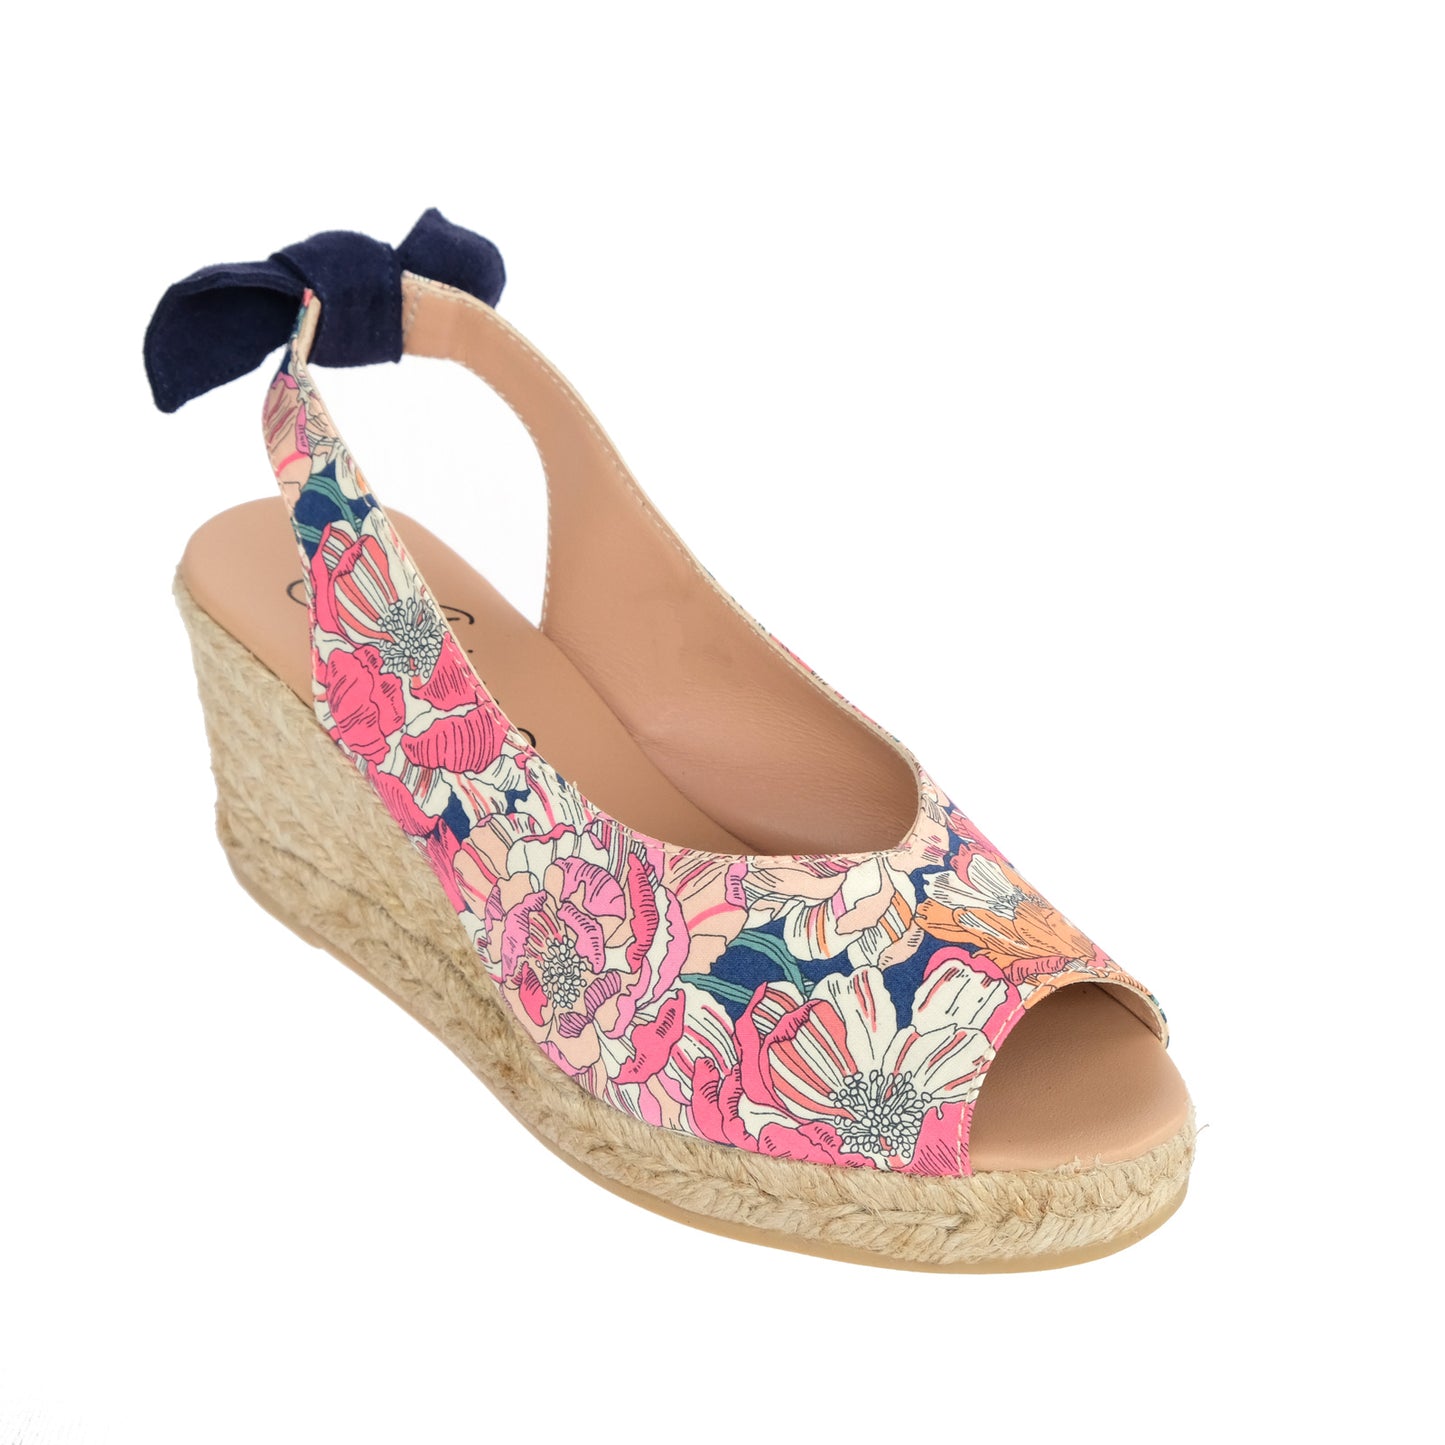 GAIL LIBERTY wedges - Elizabeth Little and Badt and Co. Limited  Collection - Badt and Co